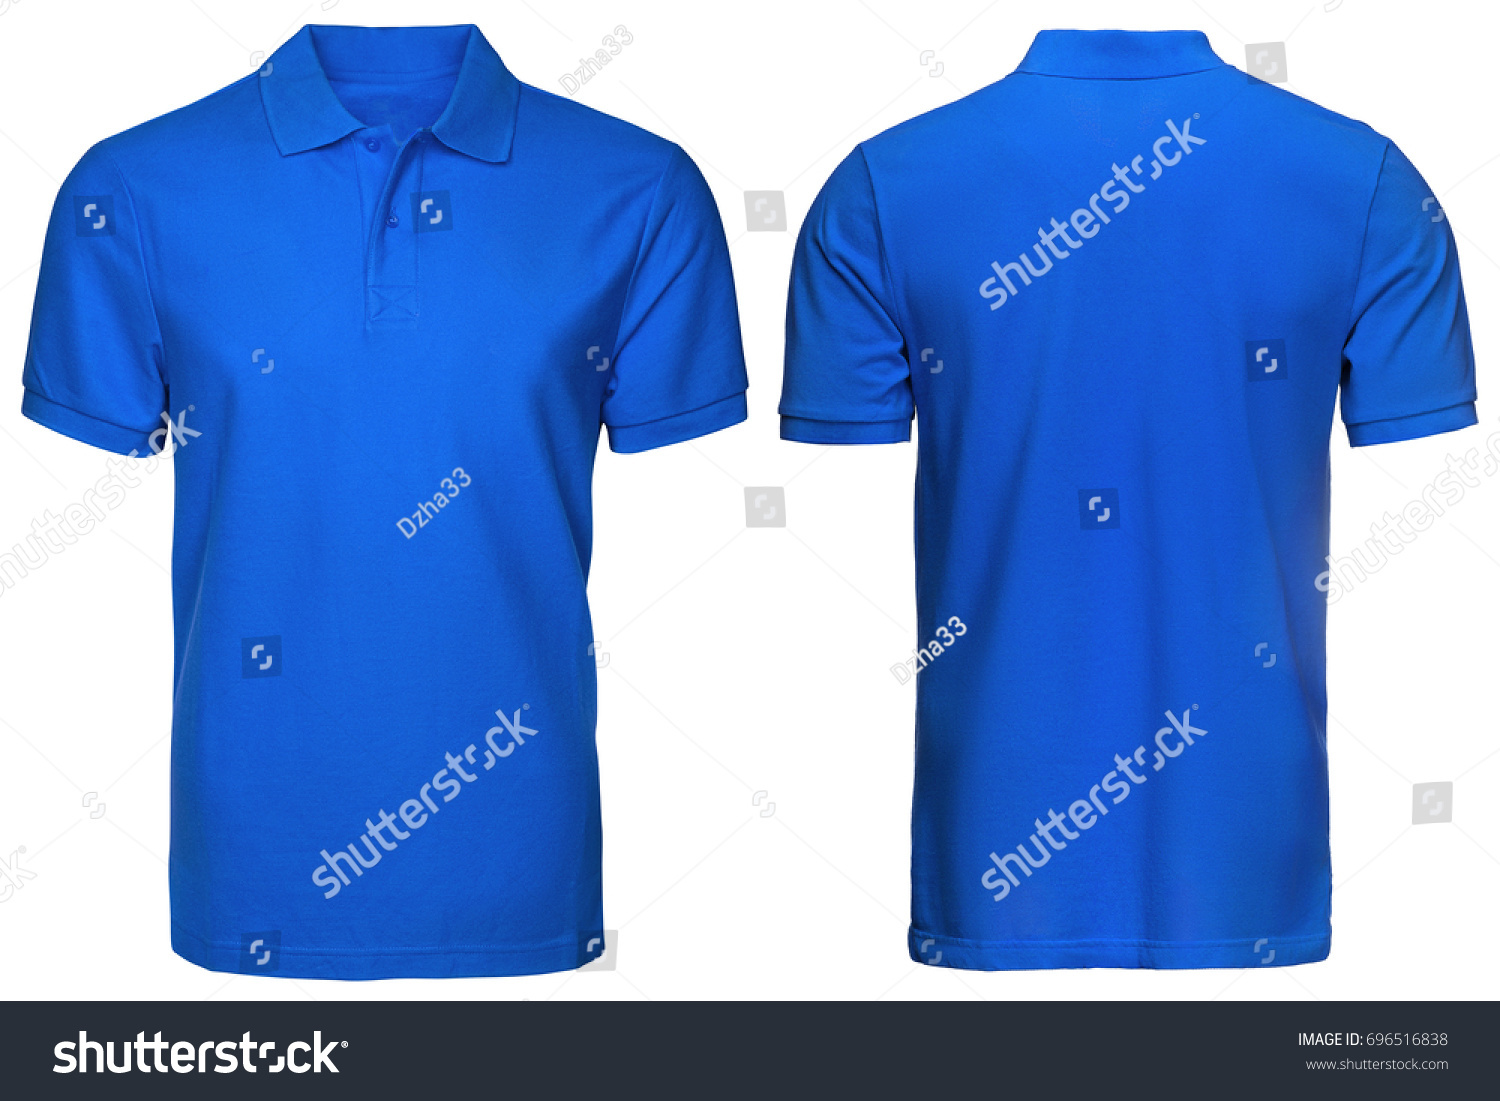 5,366 T shirt template polo Stock Photos, Images & Photography ...